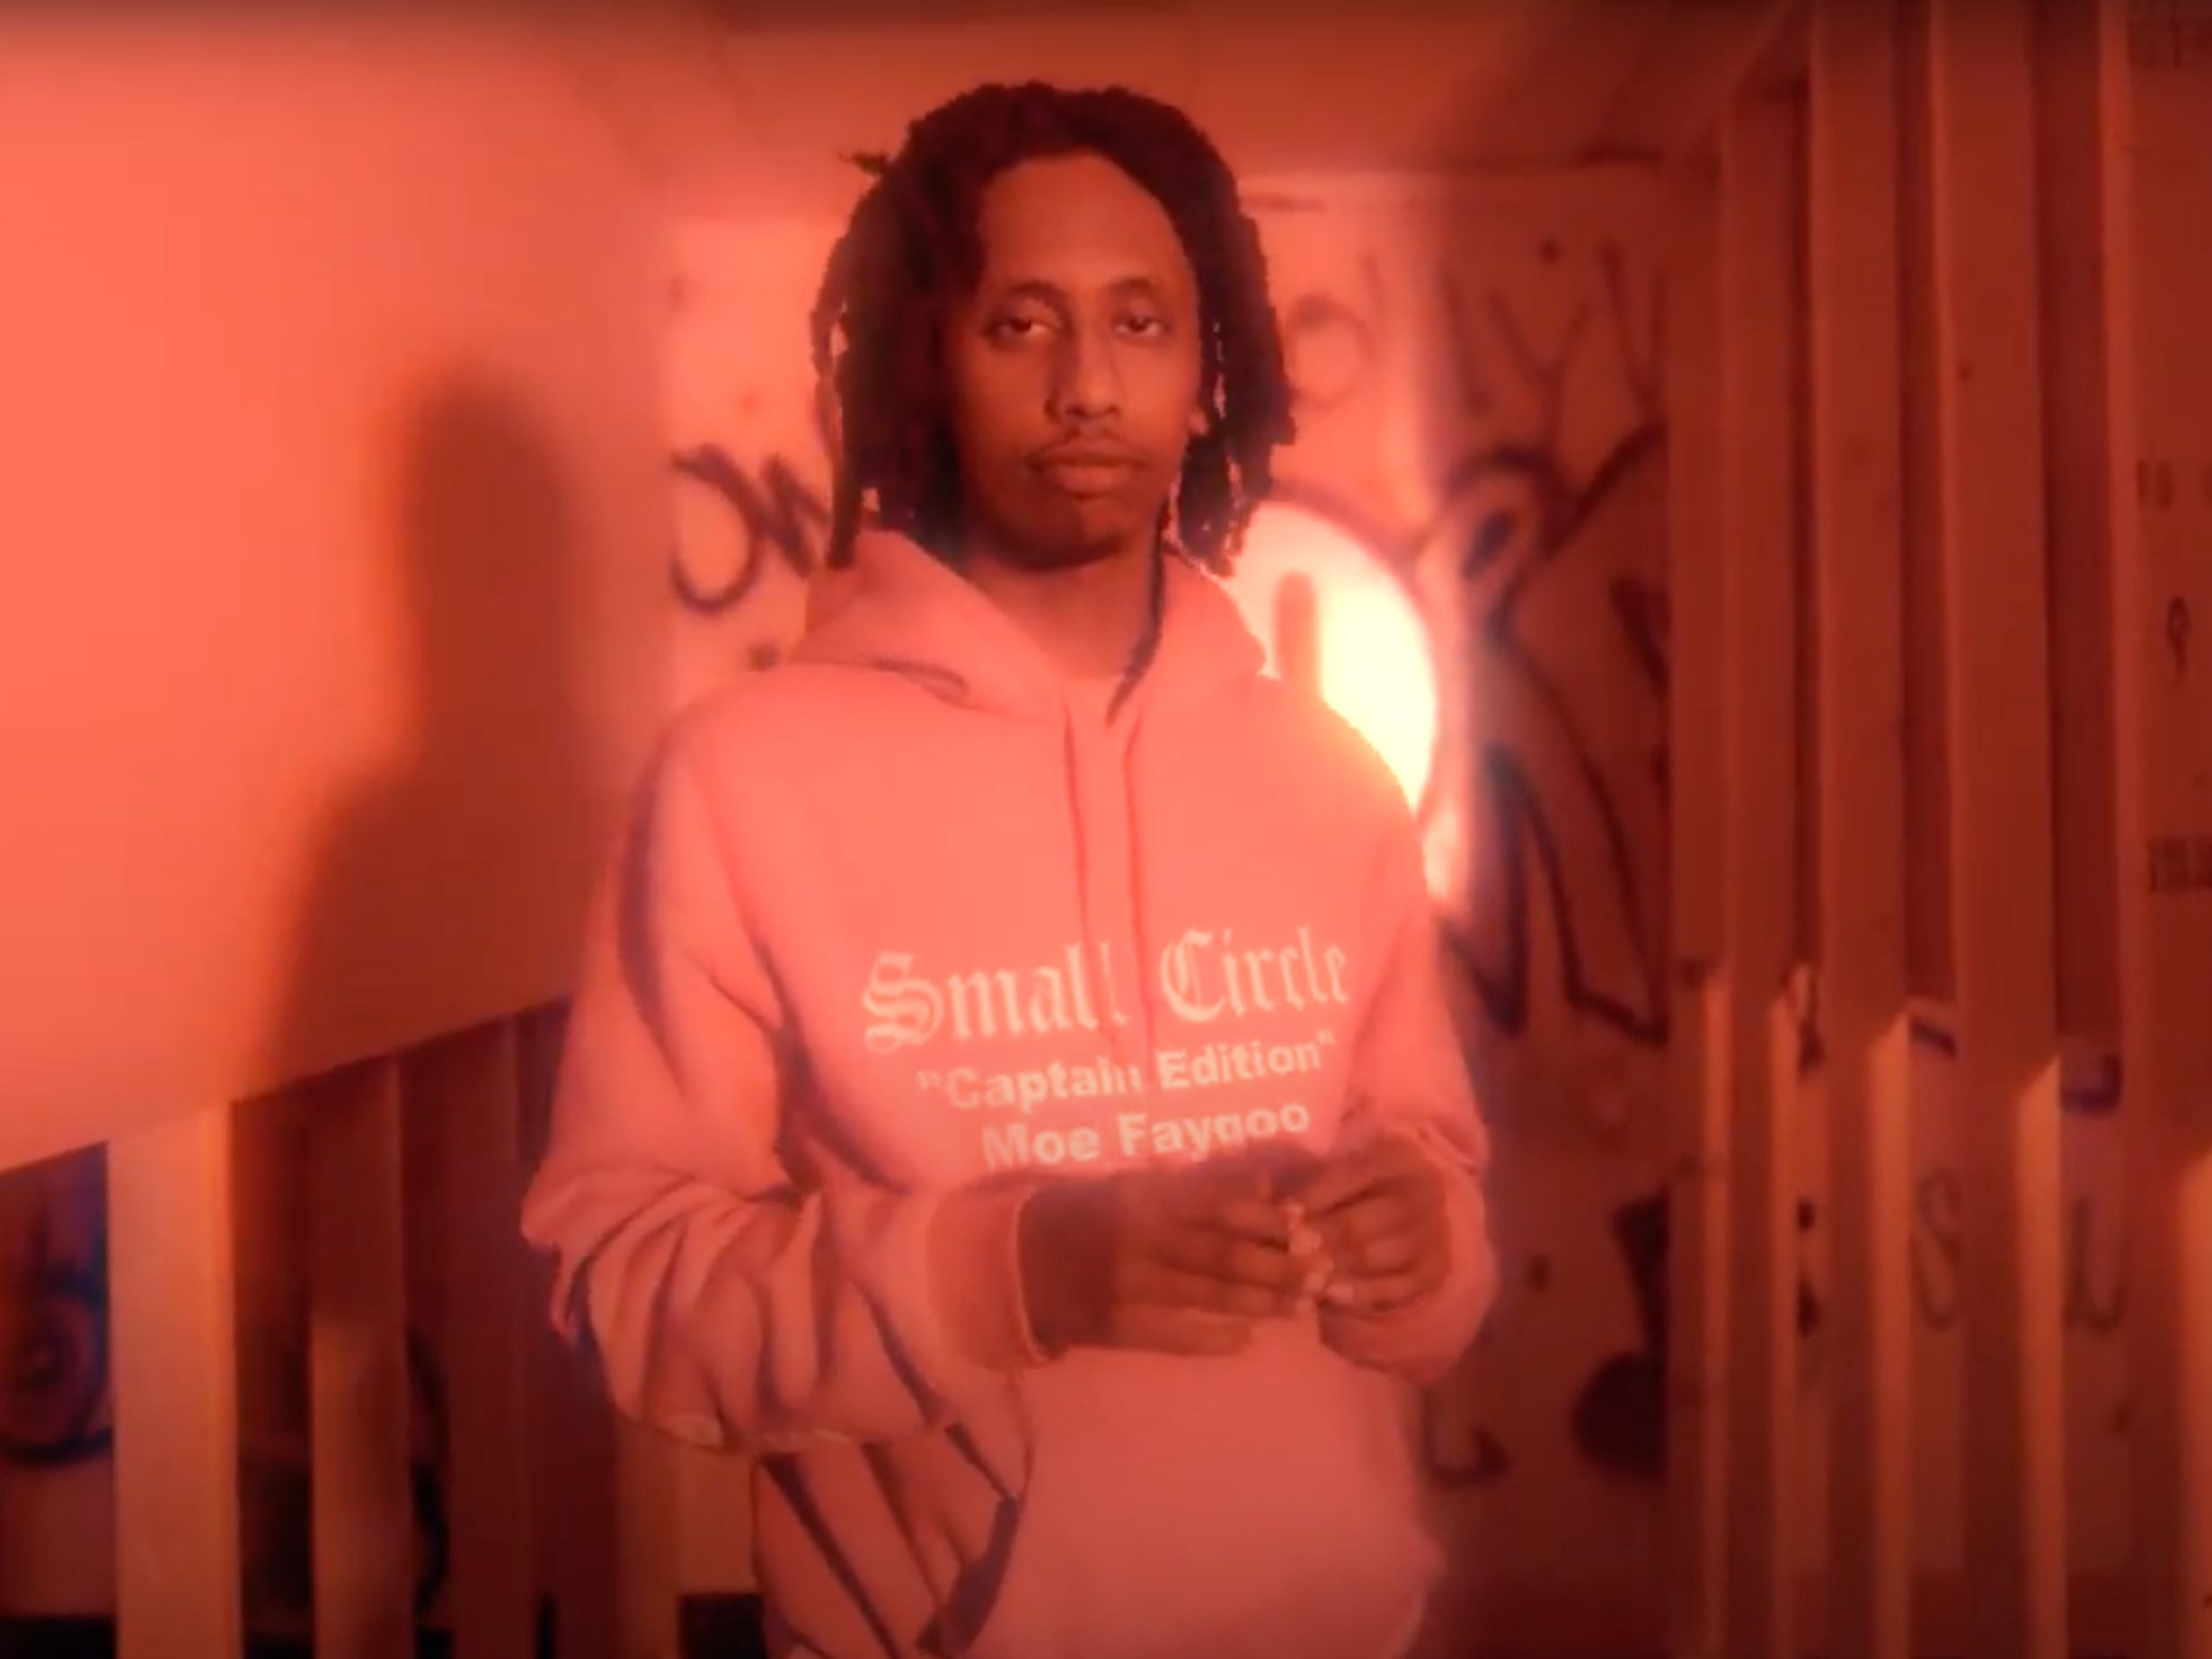 MoeFaygoo Shows Out In Rhetorical “IF” Video